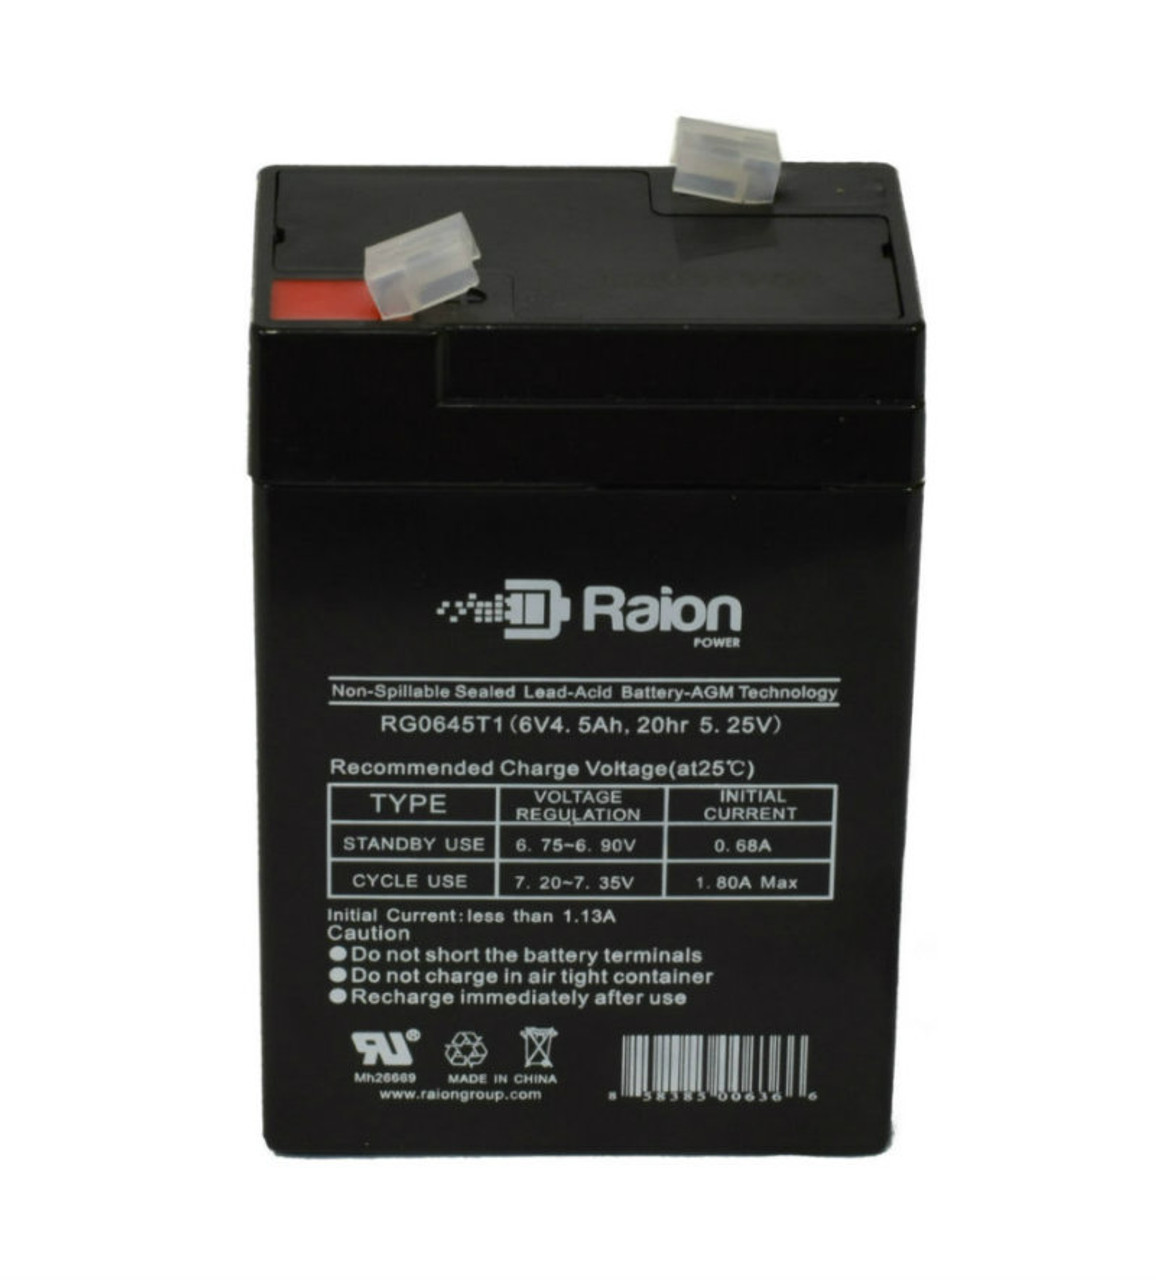 Raion Power RG0645T1 Replacement Battery Cartridge for Carpenter Watchman 713520